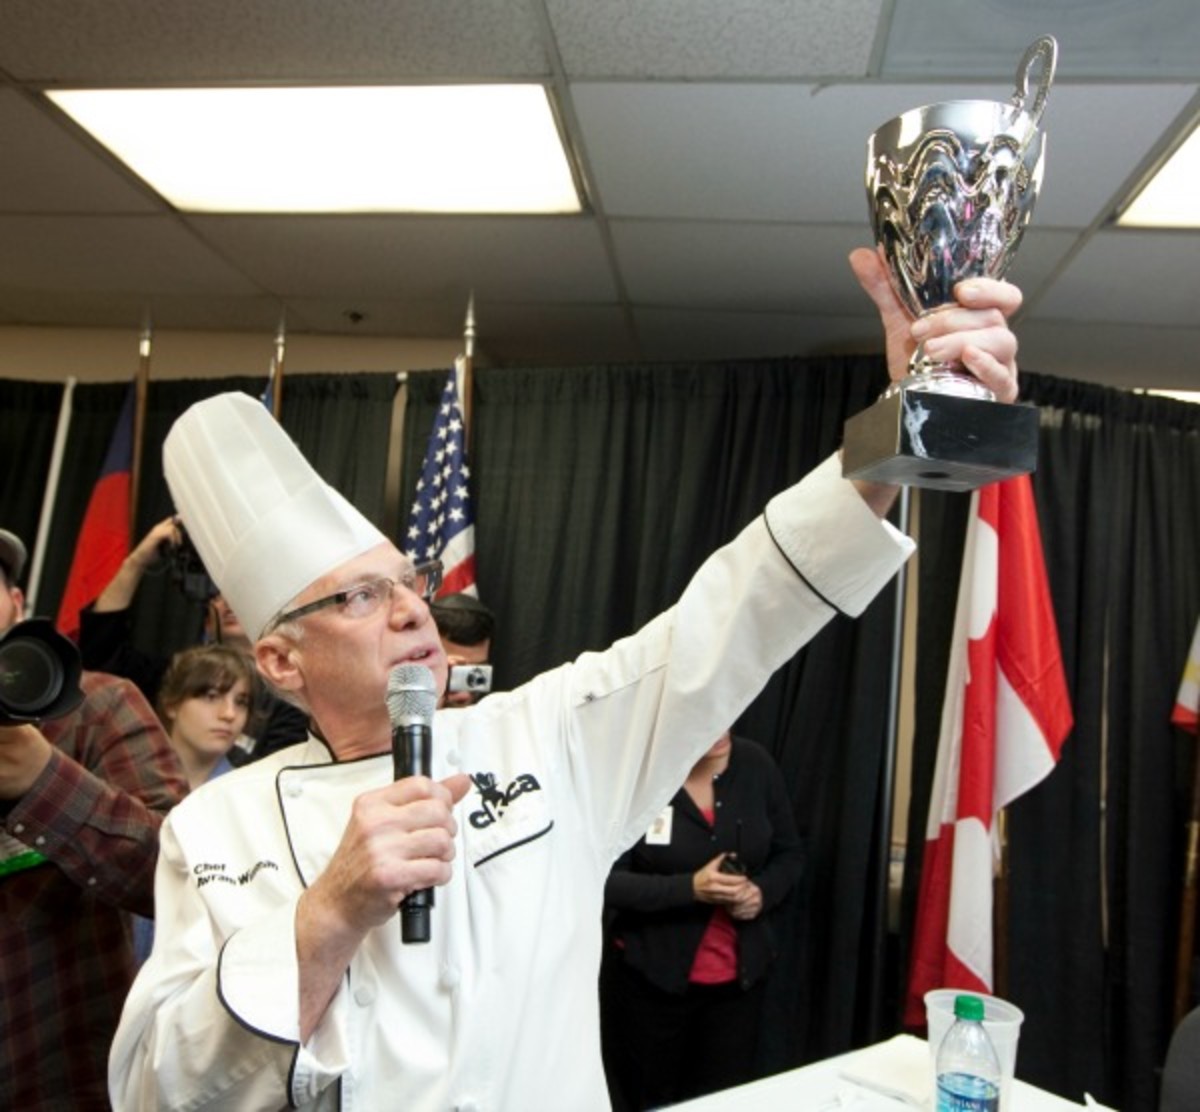 Chef Wiseman holding Trophy